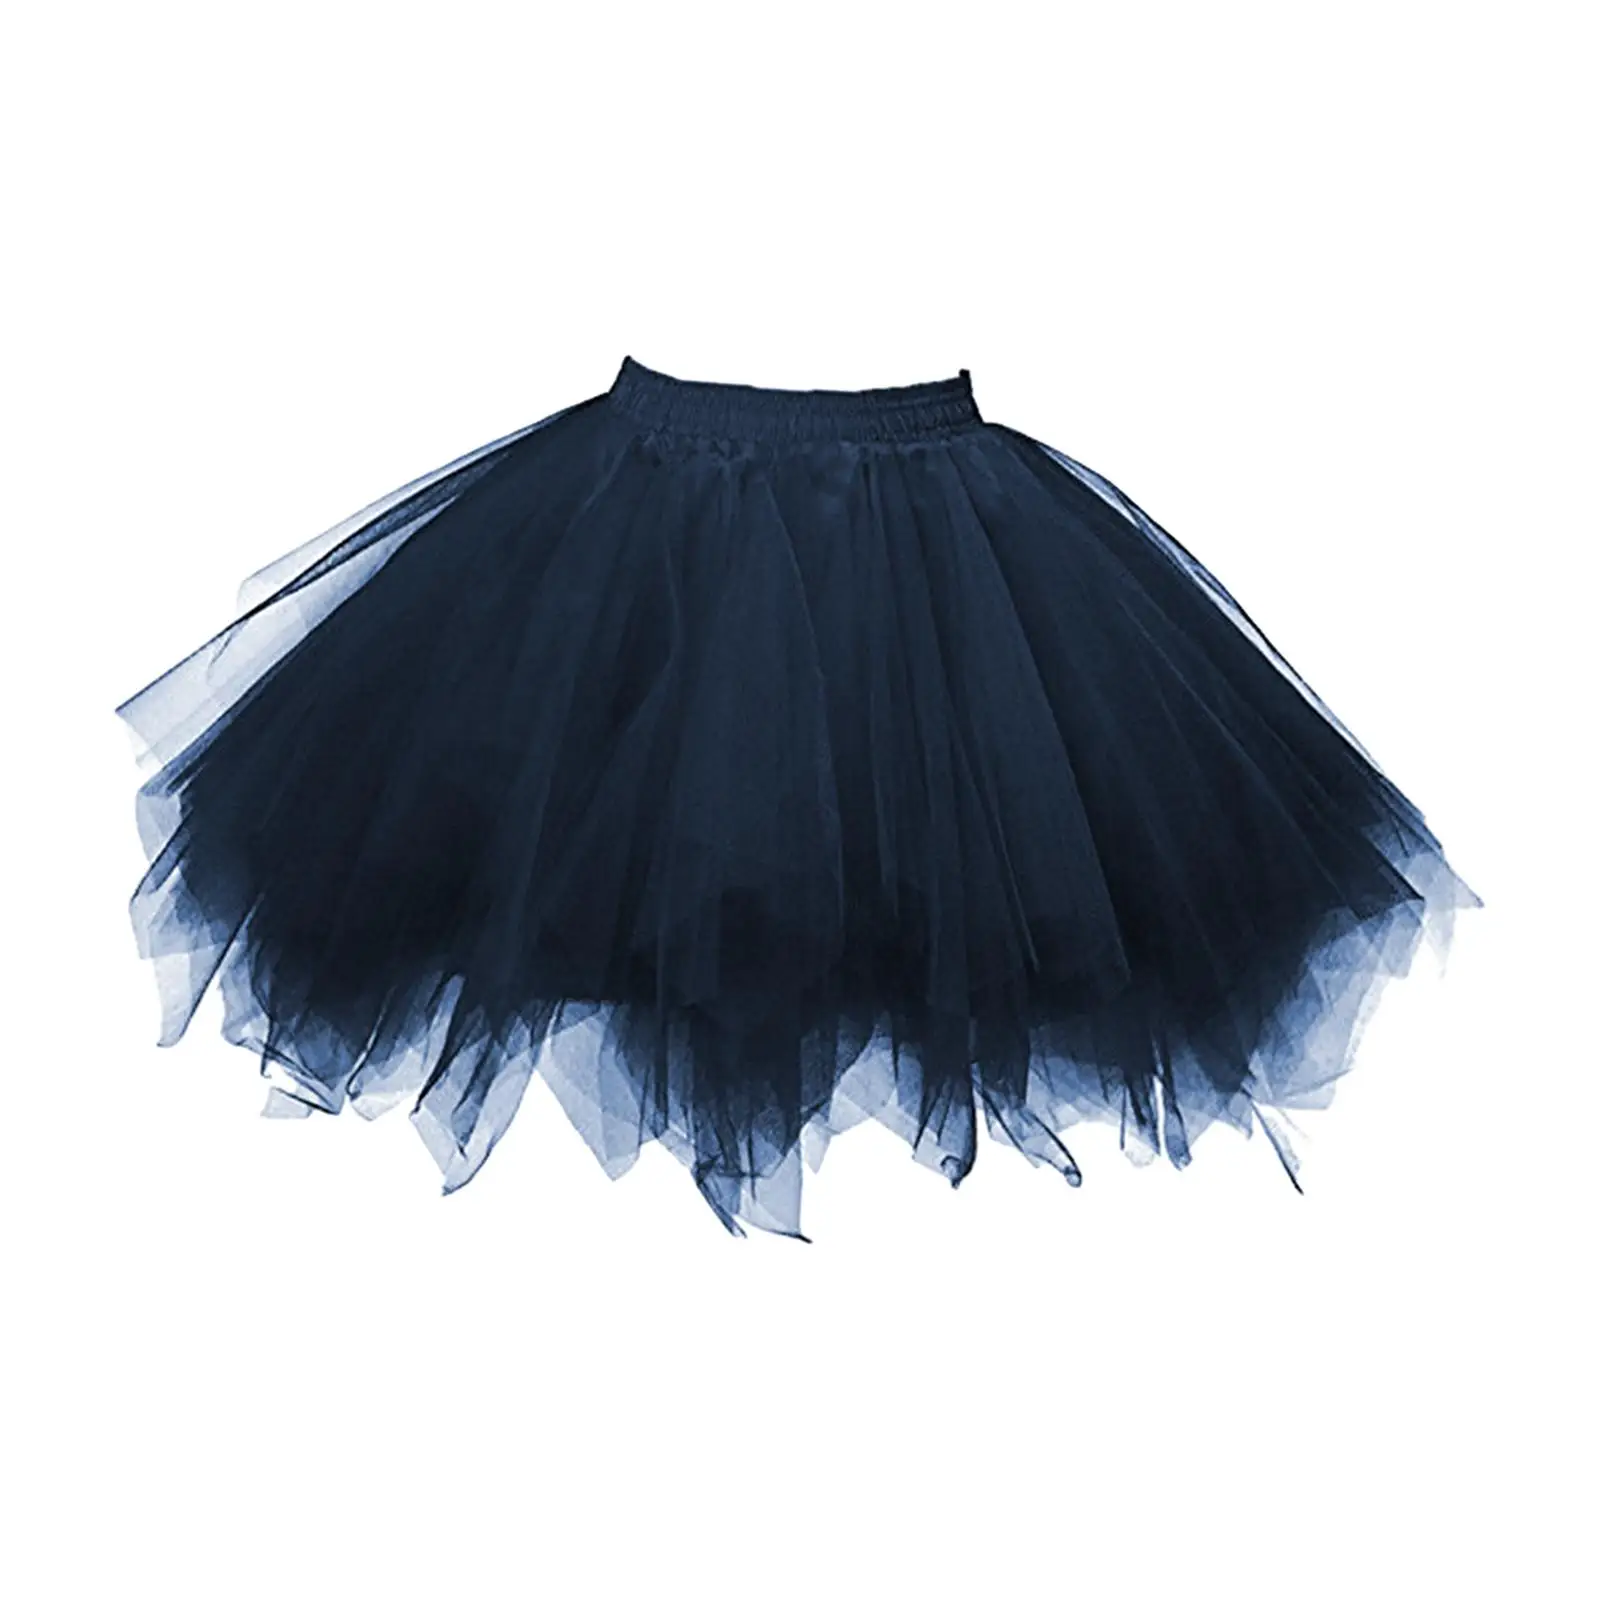 Women Tulle Tutu Skirt Dress up Ballet Dance Girl Lady Party Tulle Petticoat for Wedding Rehearsal Stage Performance Night Club